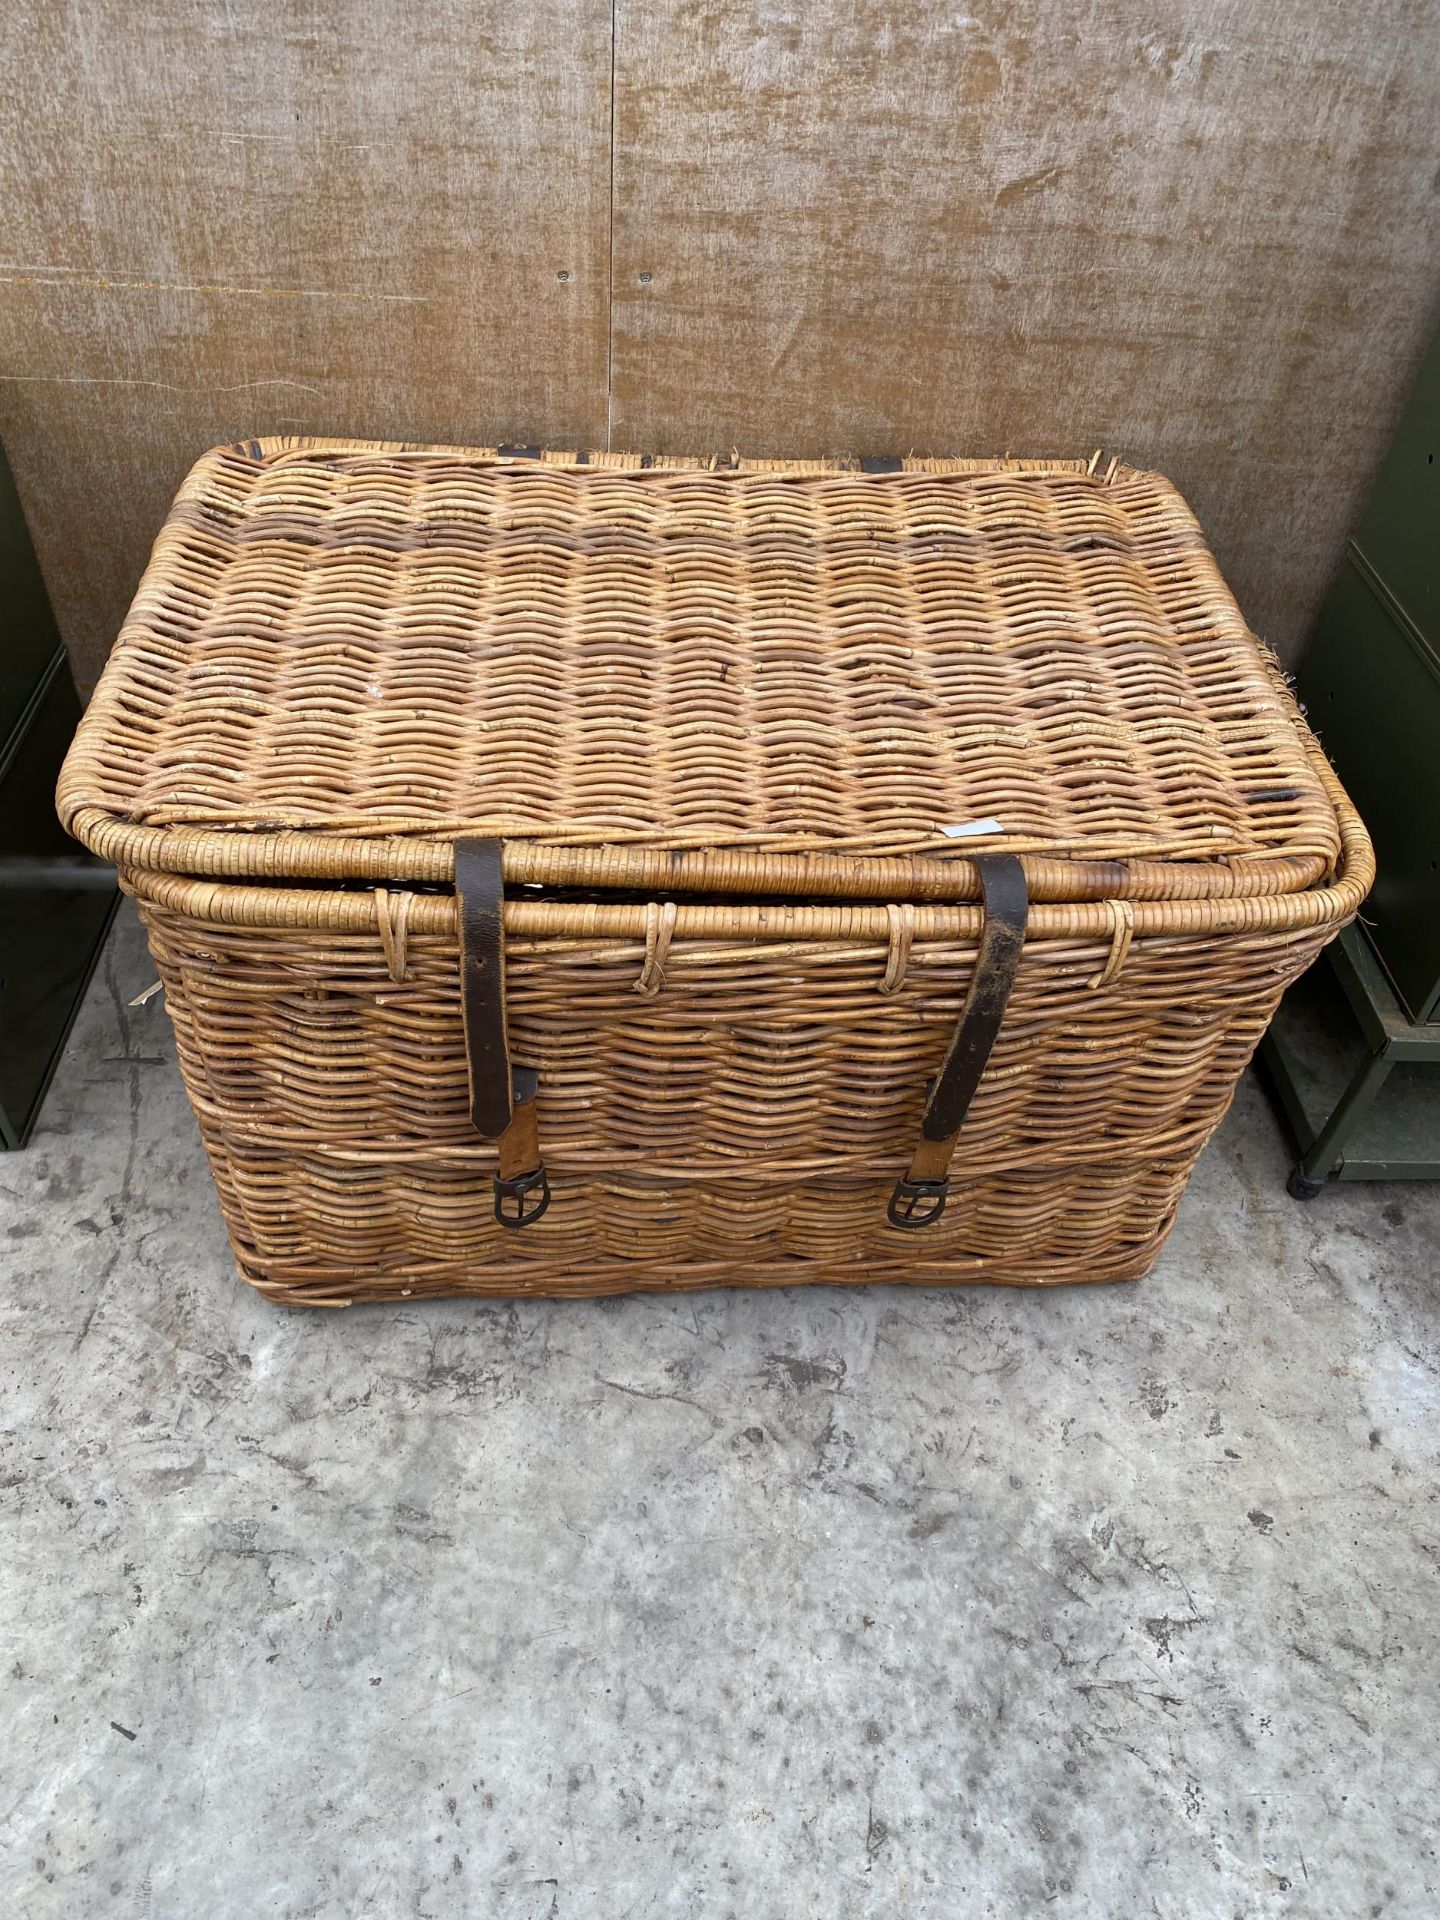 A LARGE WICKER LOG BASKET WITH HINGED LID AND LEATHER STRAPPING